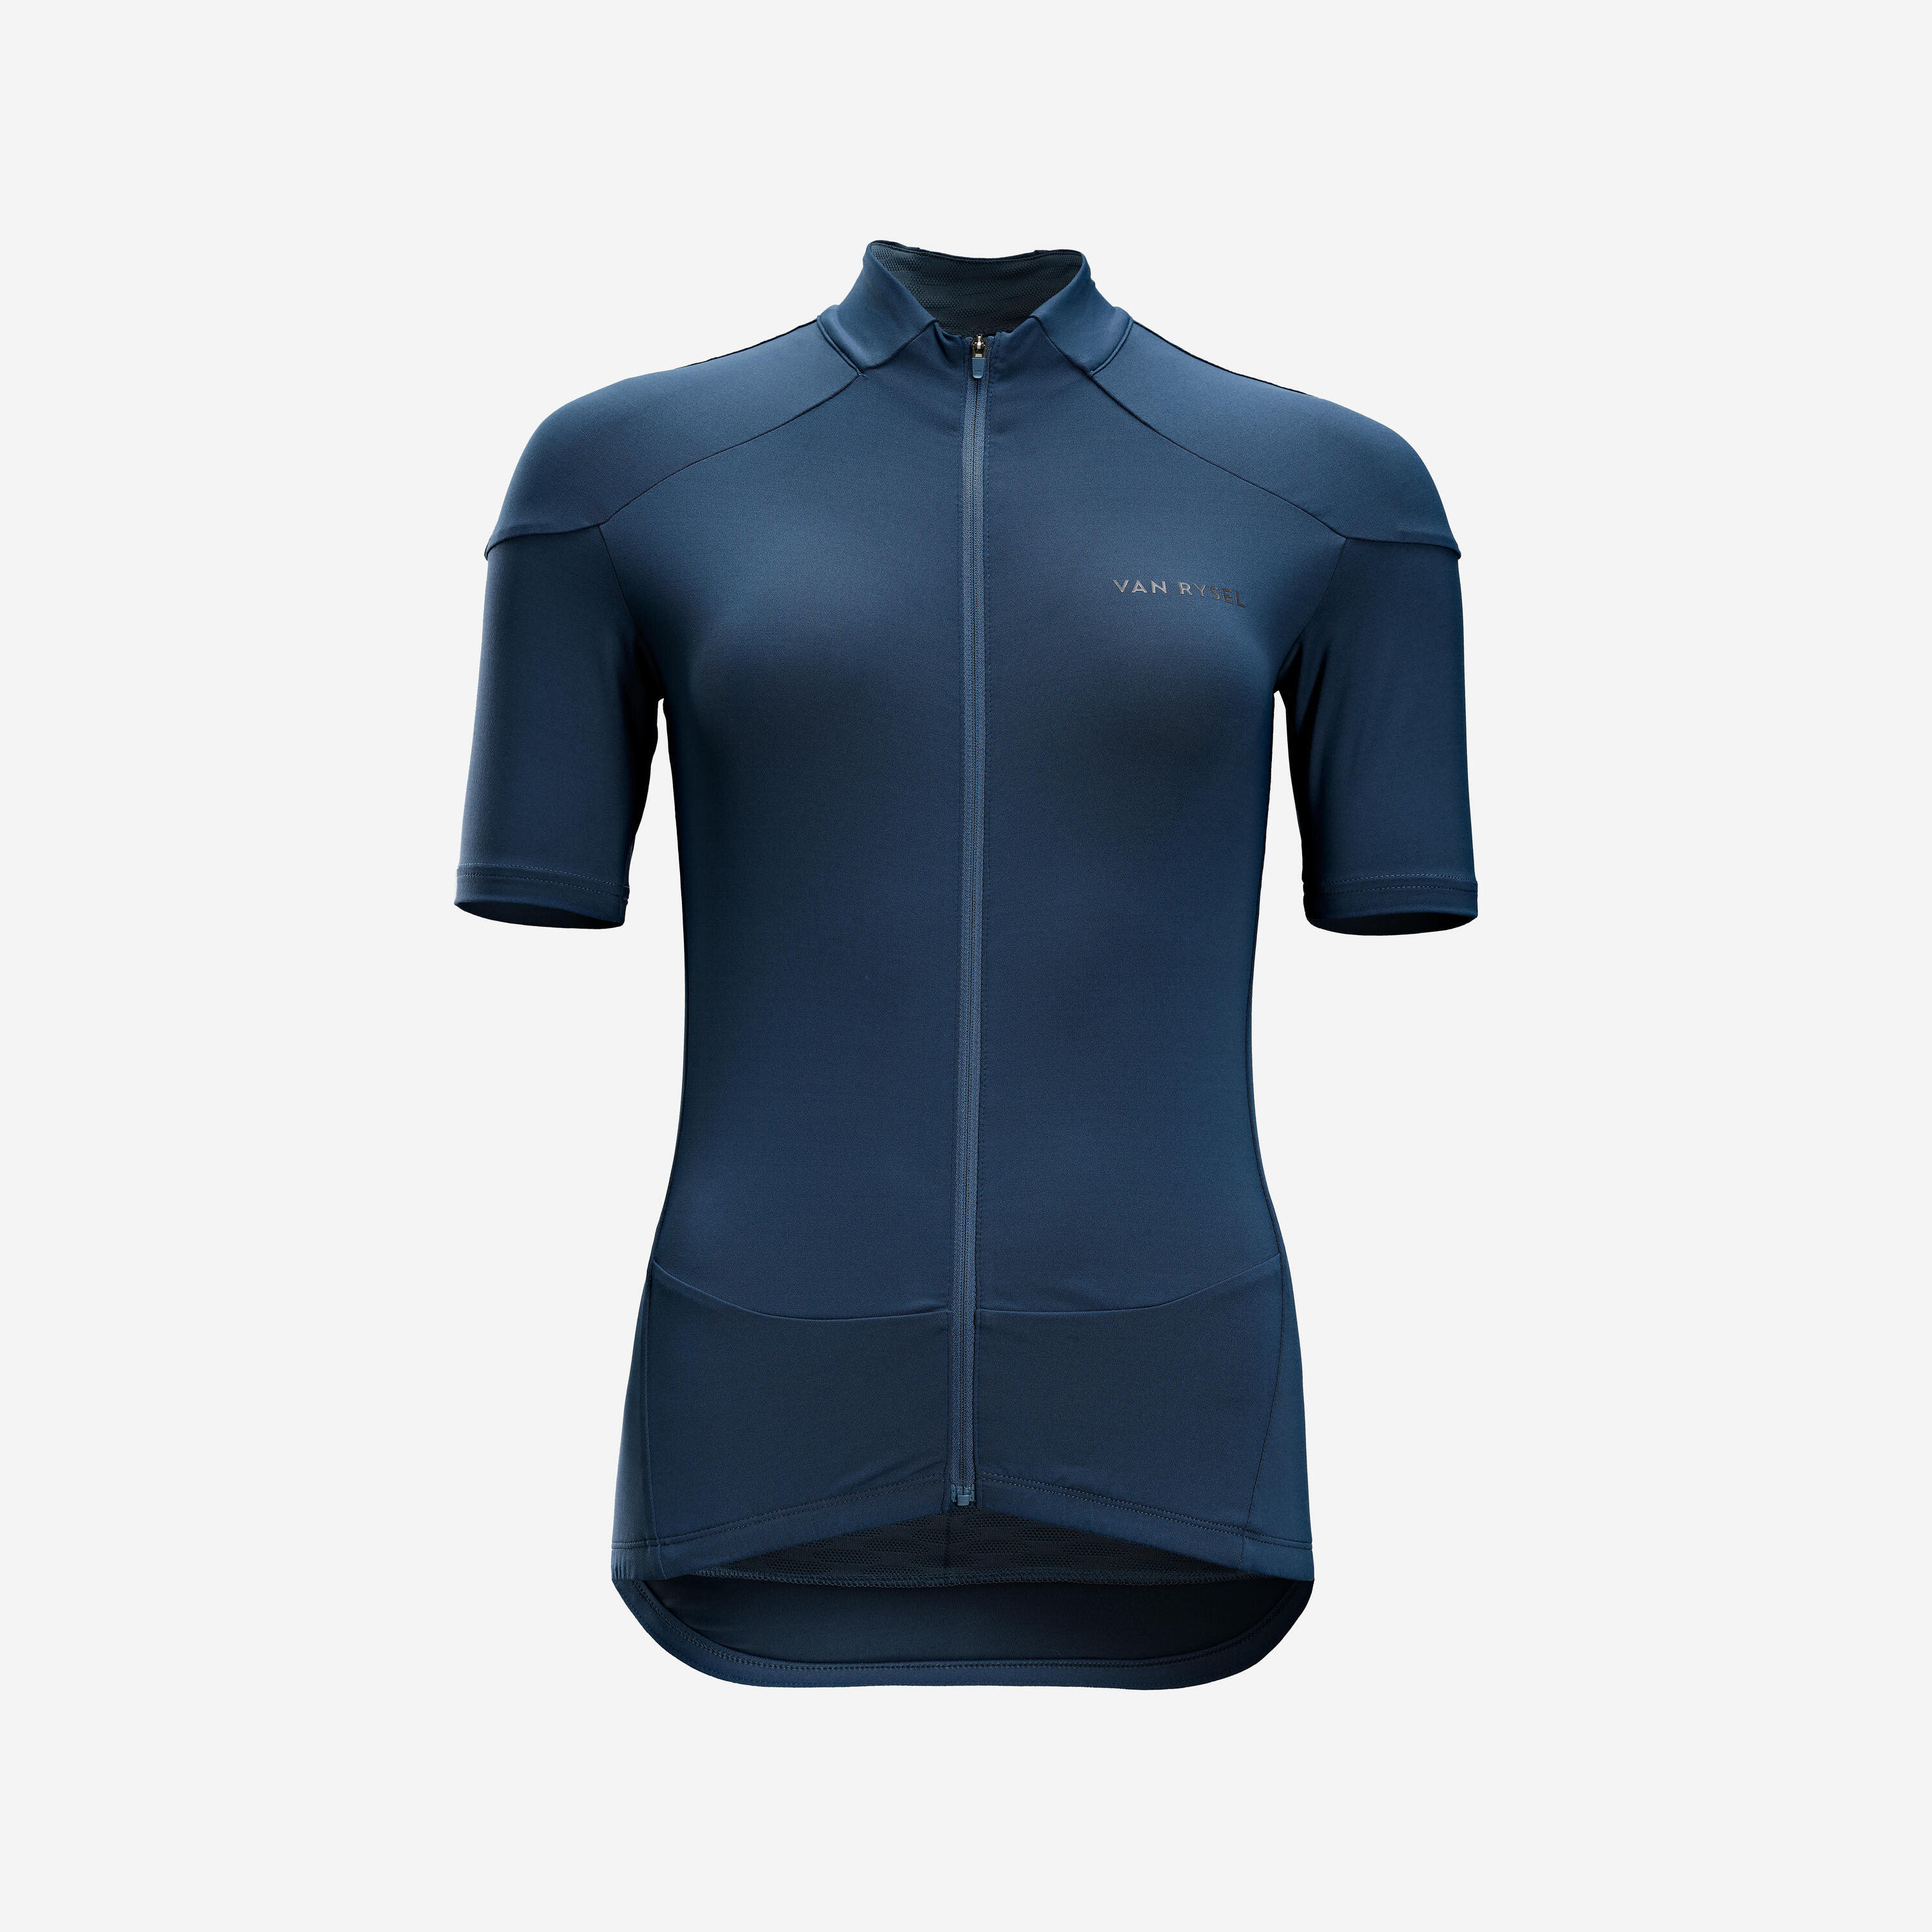 Women's Short-Sleeved Road Cycling Jersey RC500 - Slate 1/7